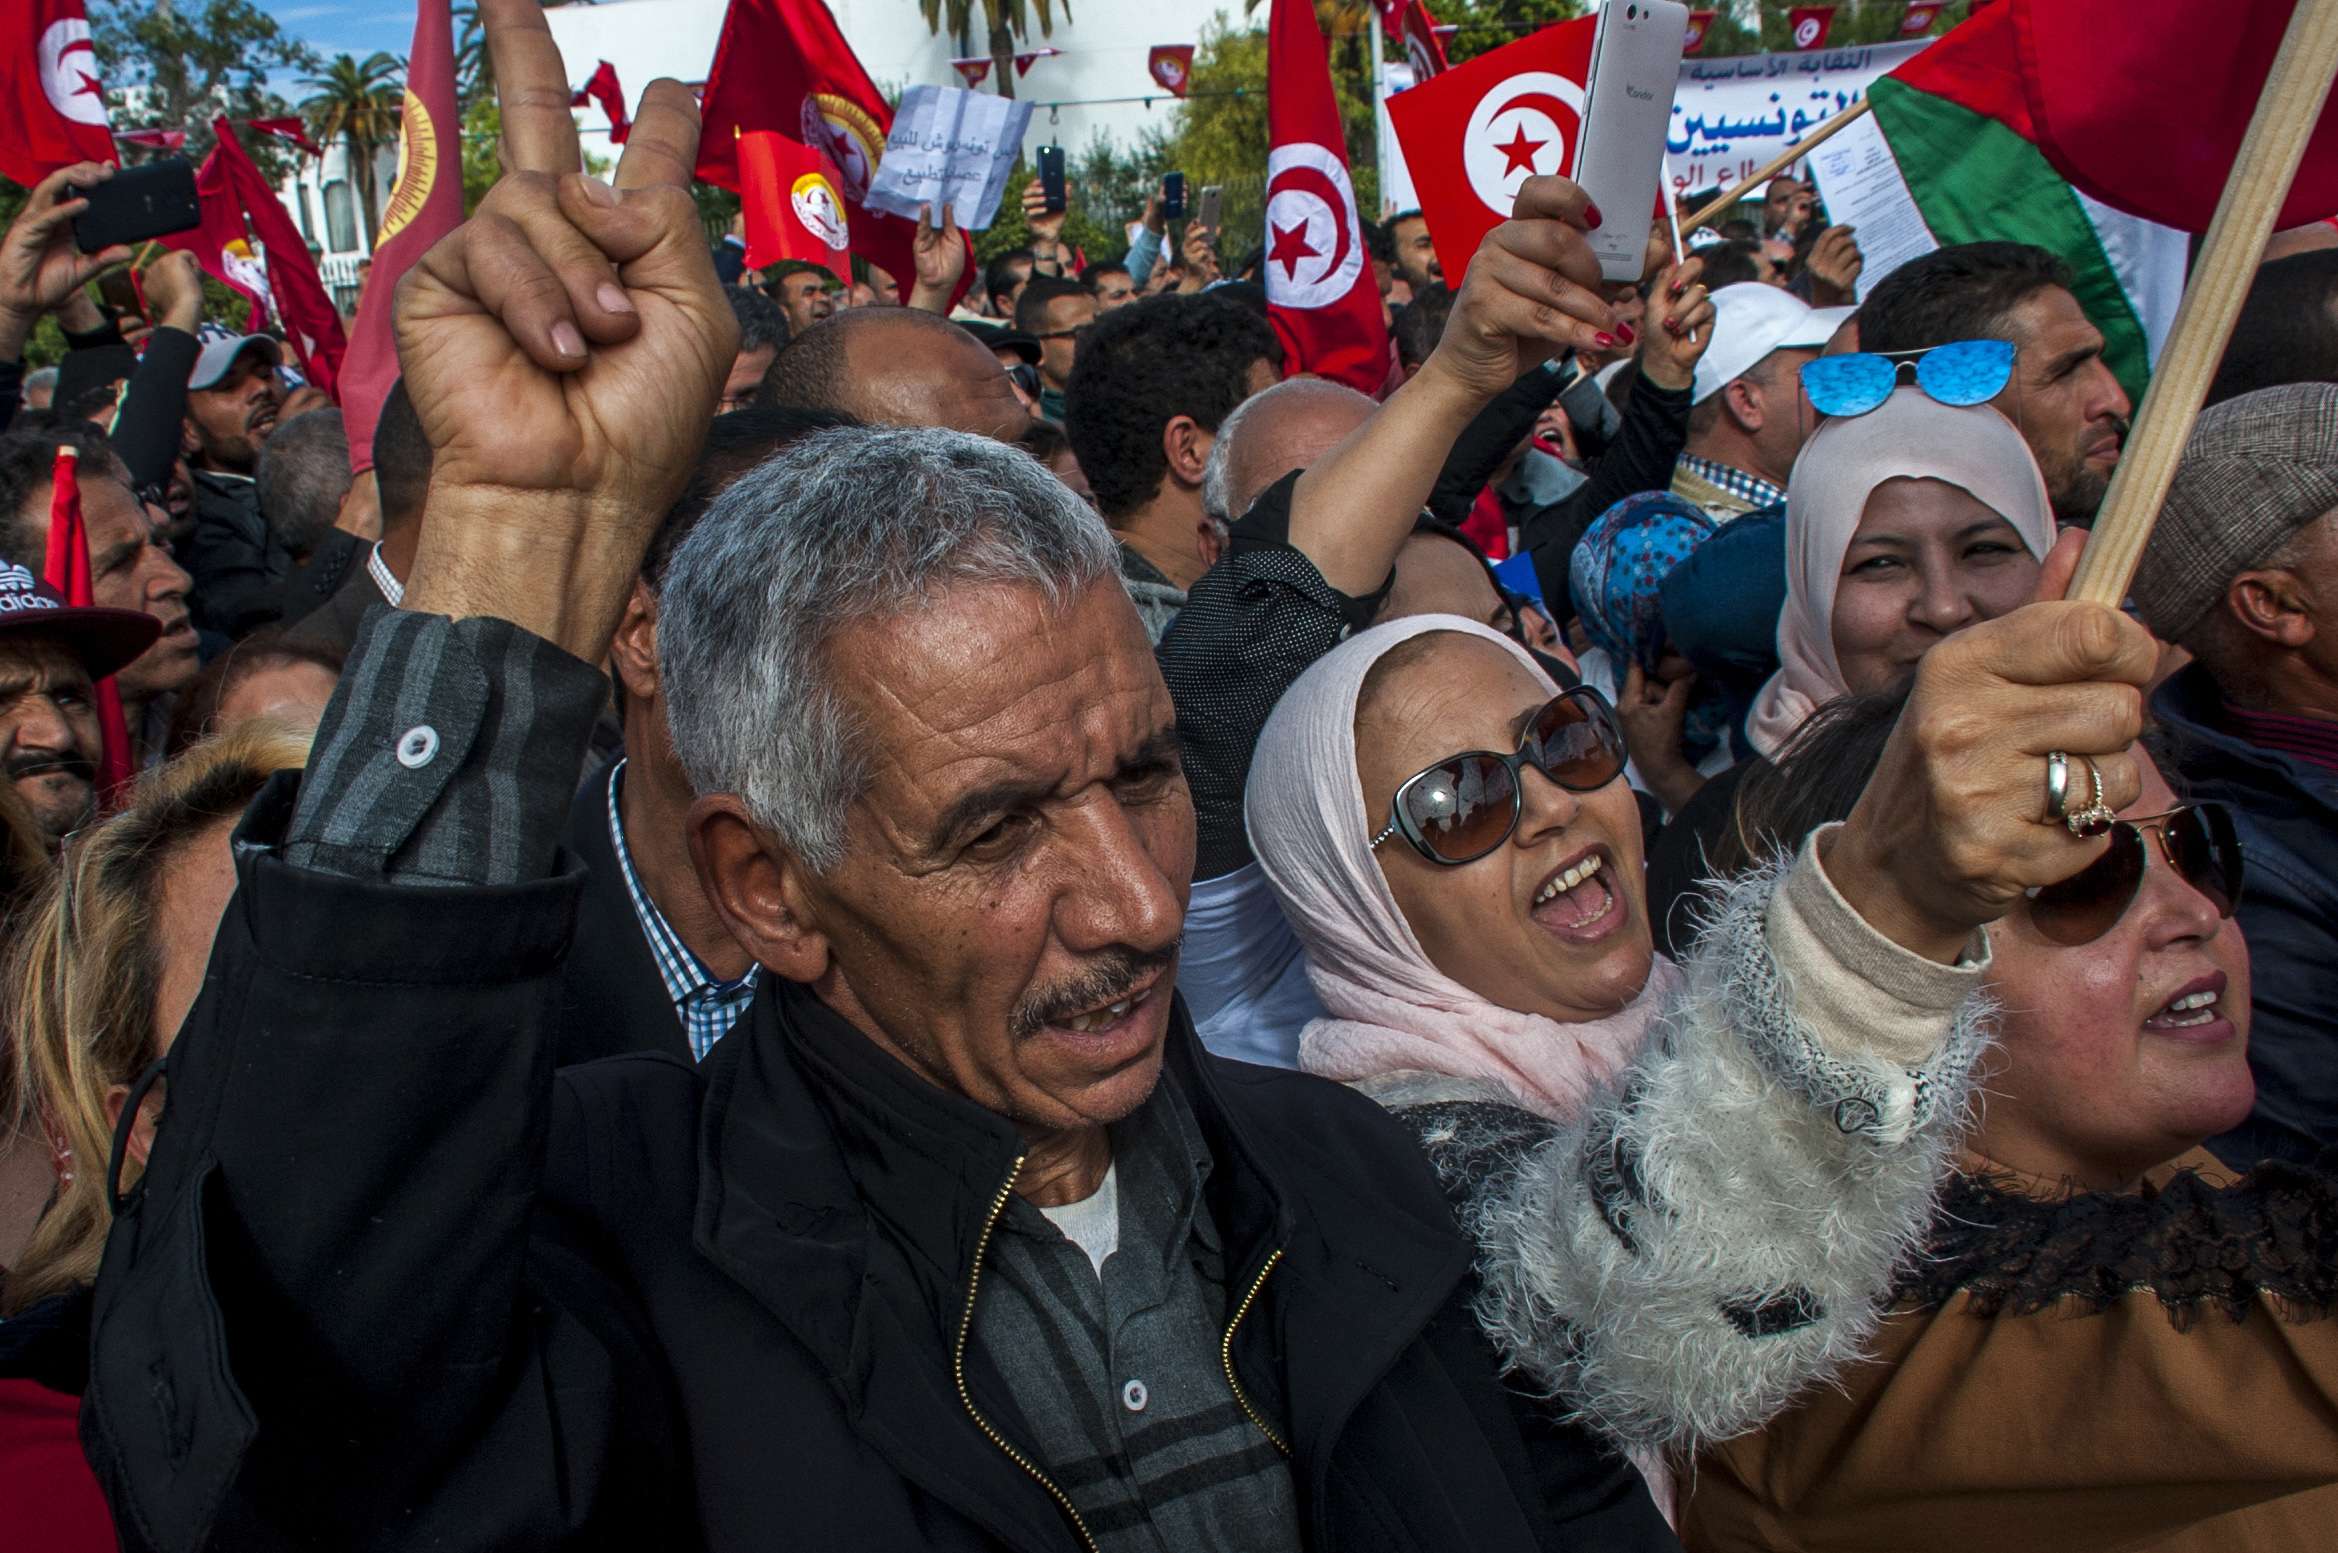 Hundreds of Tunisian public-sector workers demonstrate after failing to reach a wage agreement with the government in Tunis on Nov. 22, 2018.